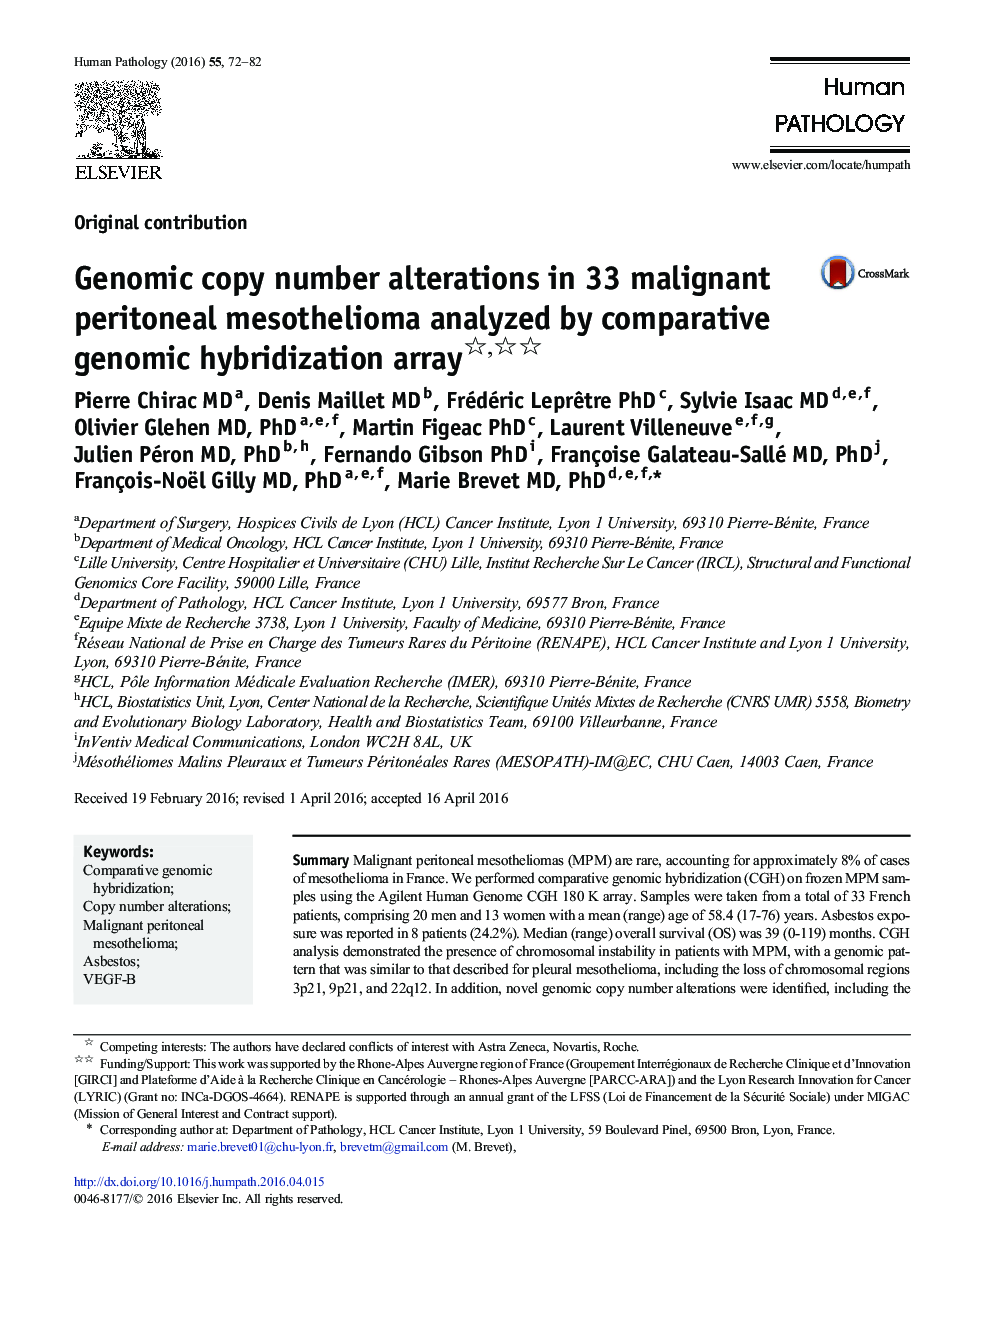 Genomic copy number alterations in 33 malignant peritoneal mesothelioma analyzed by comparative genomic hybridization array